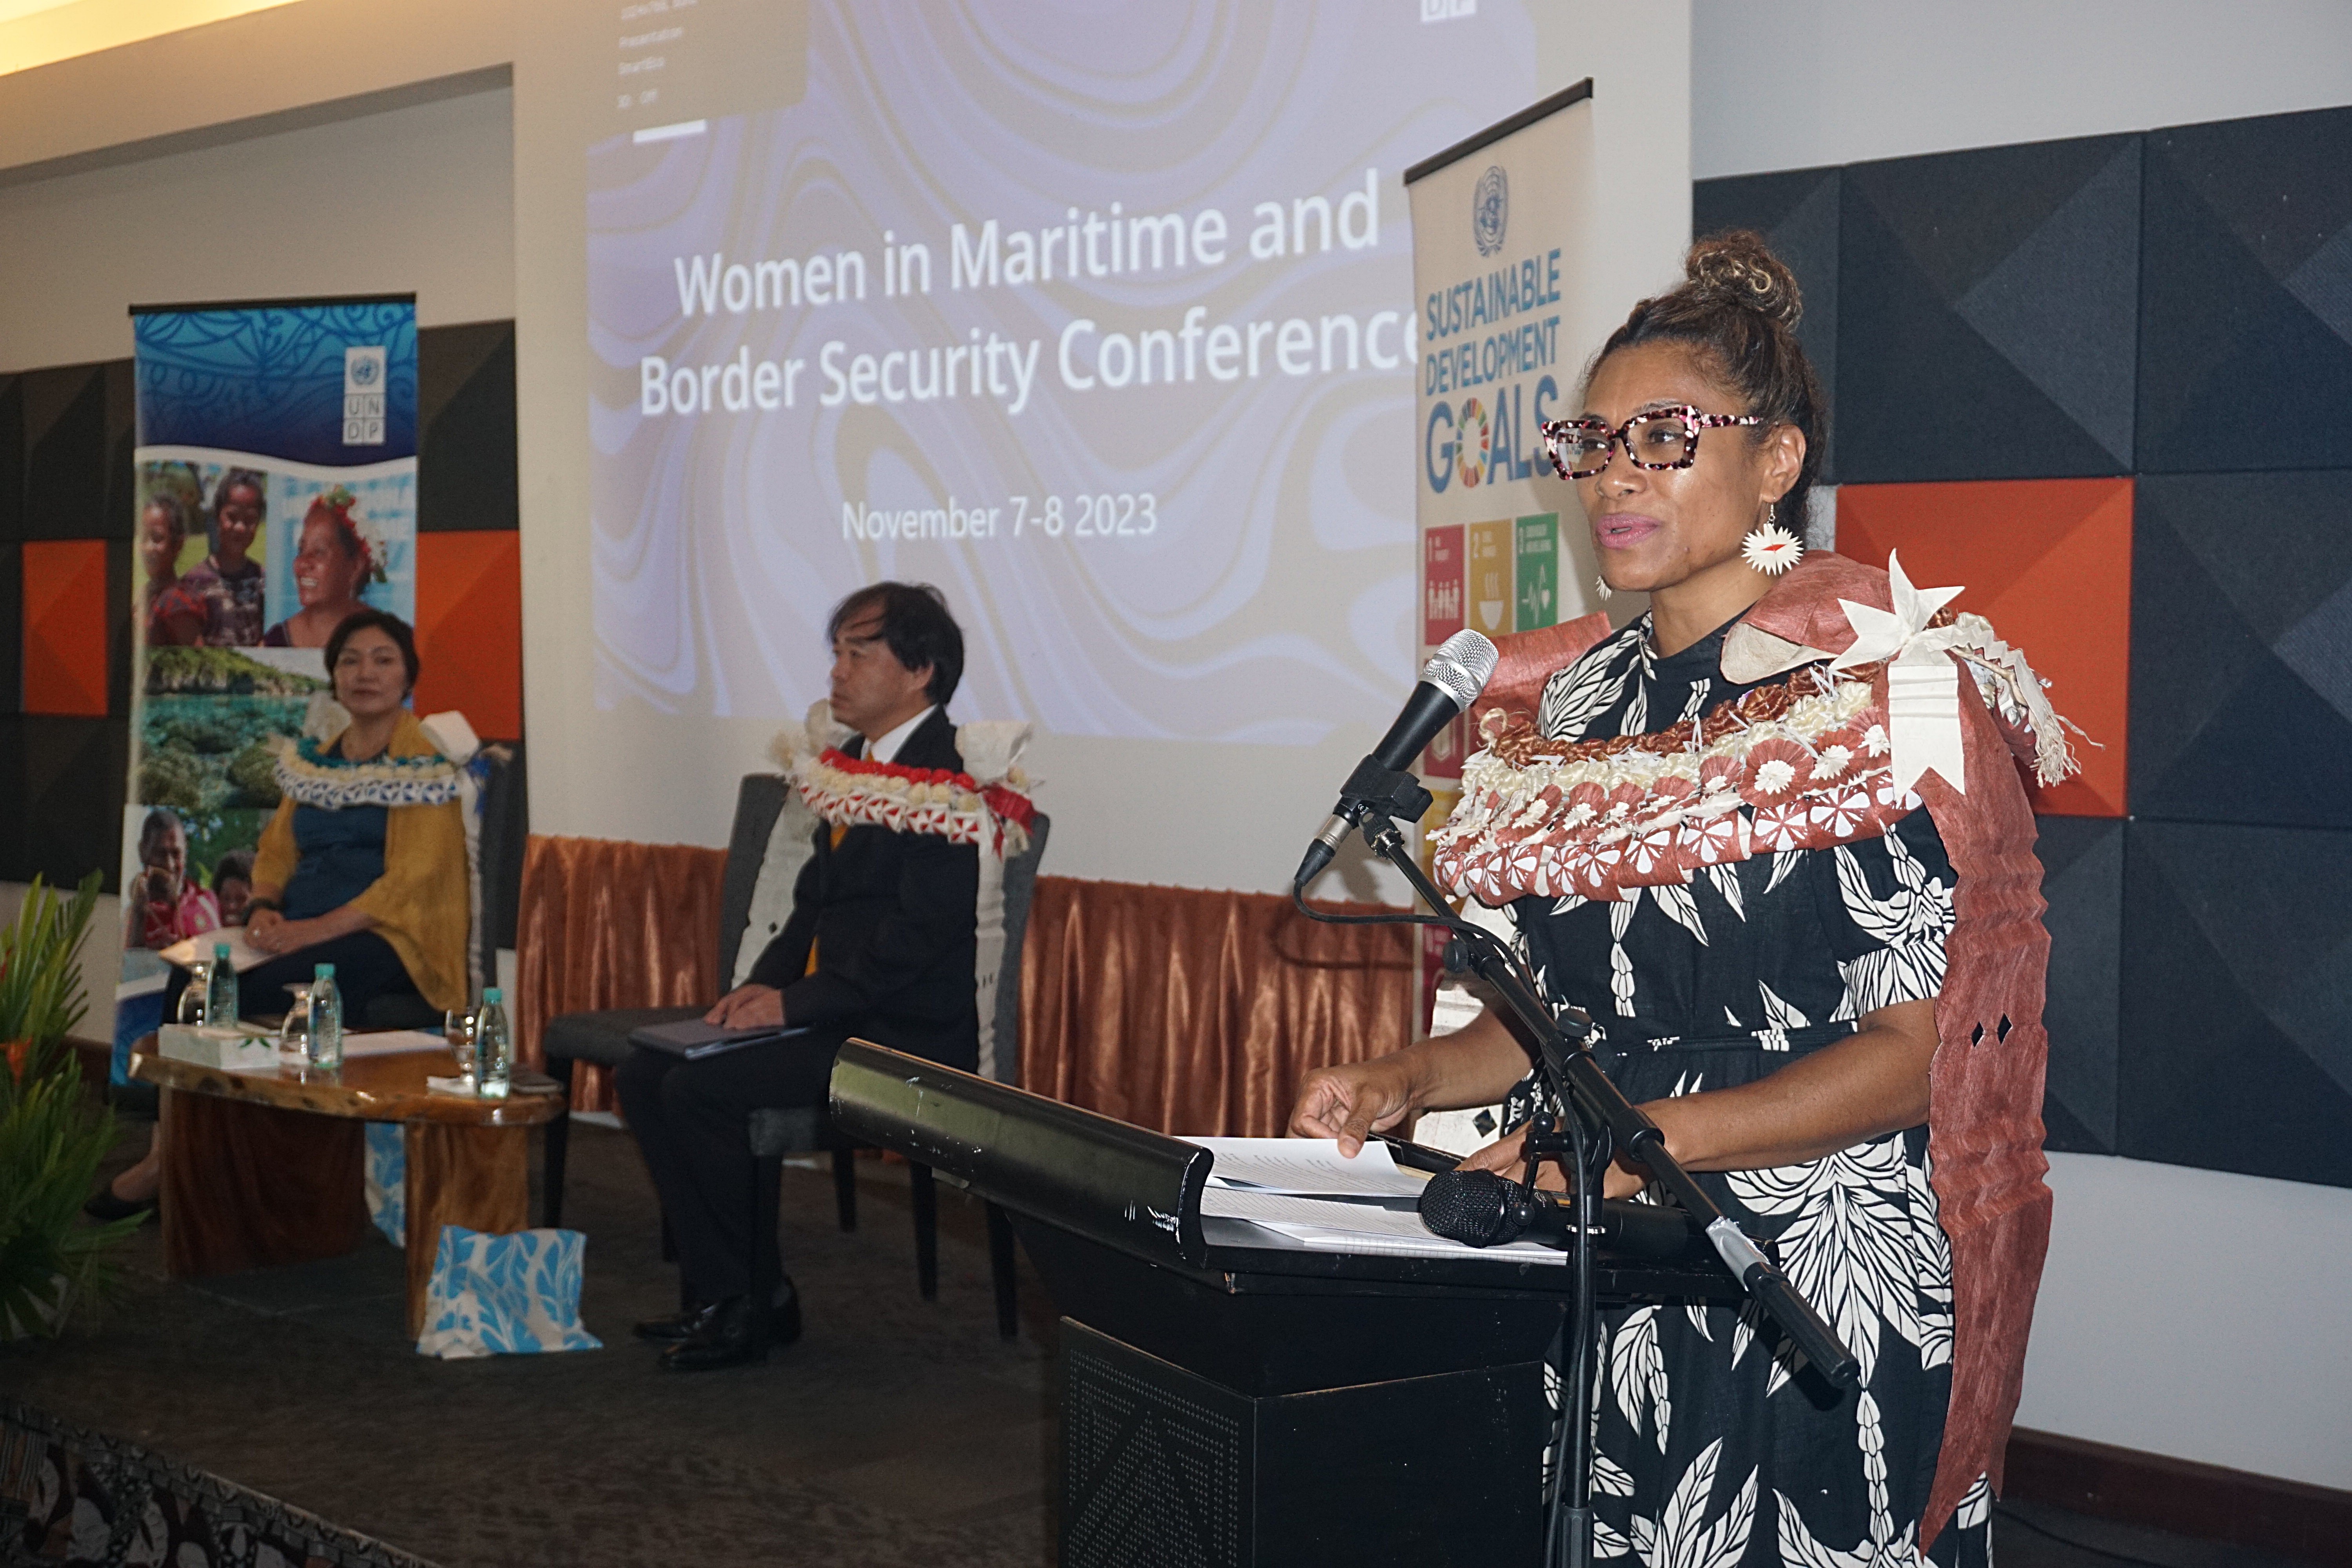 Women in maritime and border management